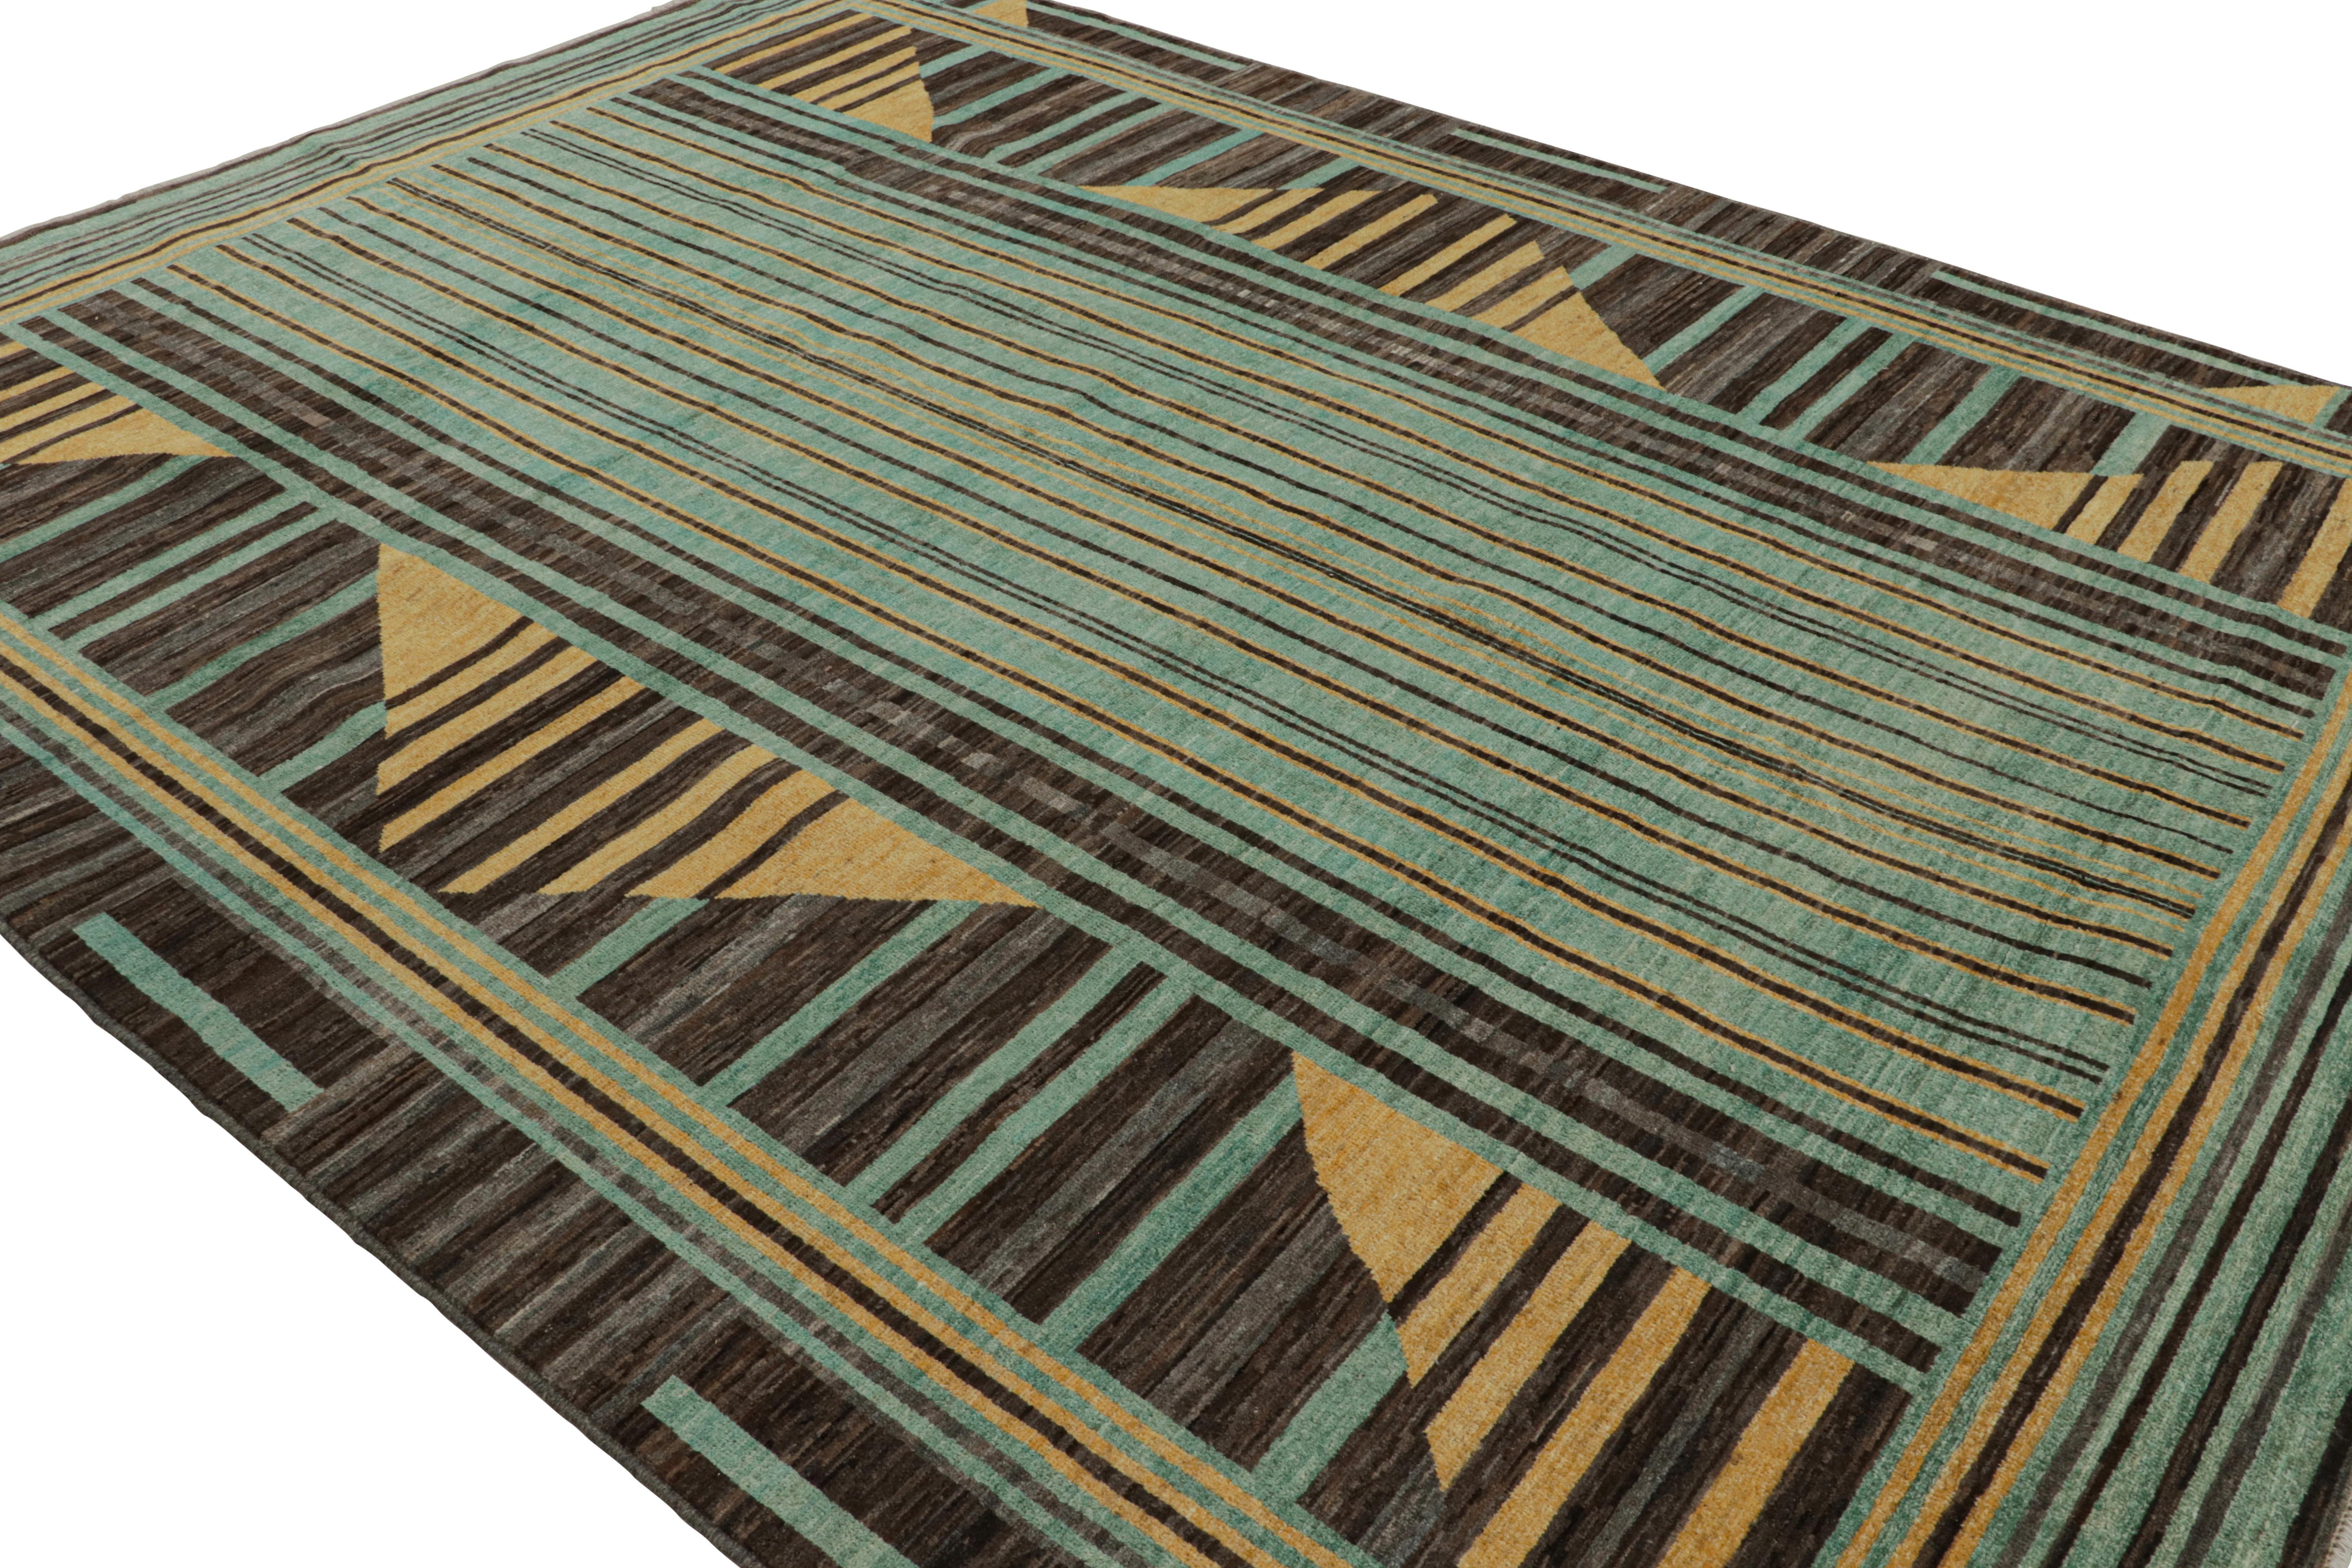 Hand-knotted in wool, this 9x12 Scandinavian rug with dynamic geometric patterns has been inspired by vintage Swedish Deco rugs in the Rya and Rollakhan style. 

On the Design: 

This Scandinavian masterpiece favors dynamic geometry with a sense of